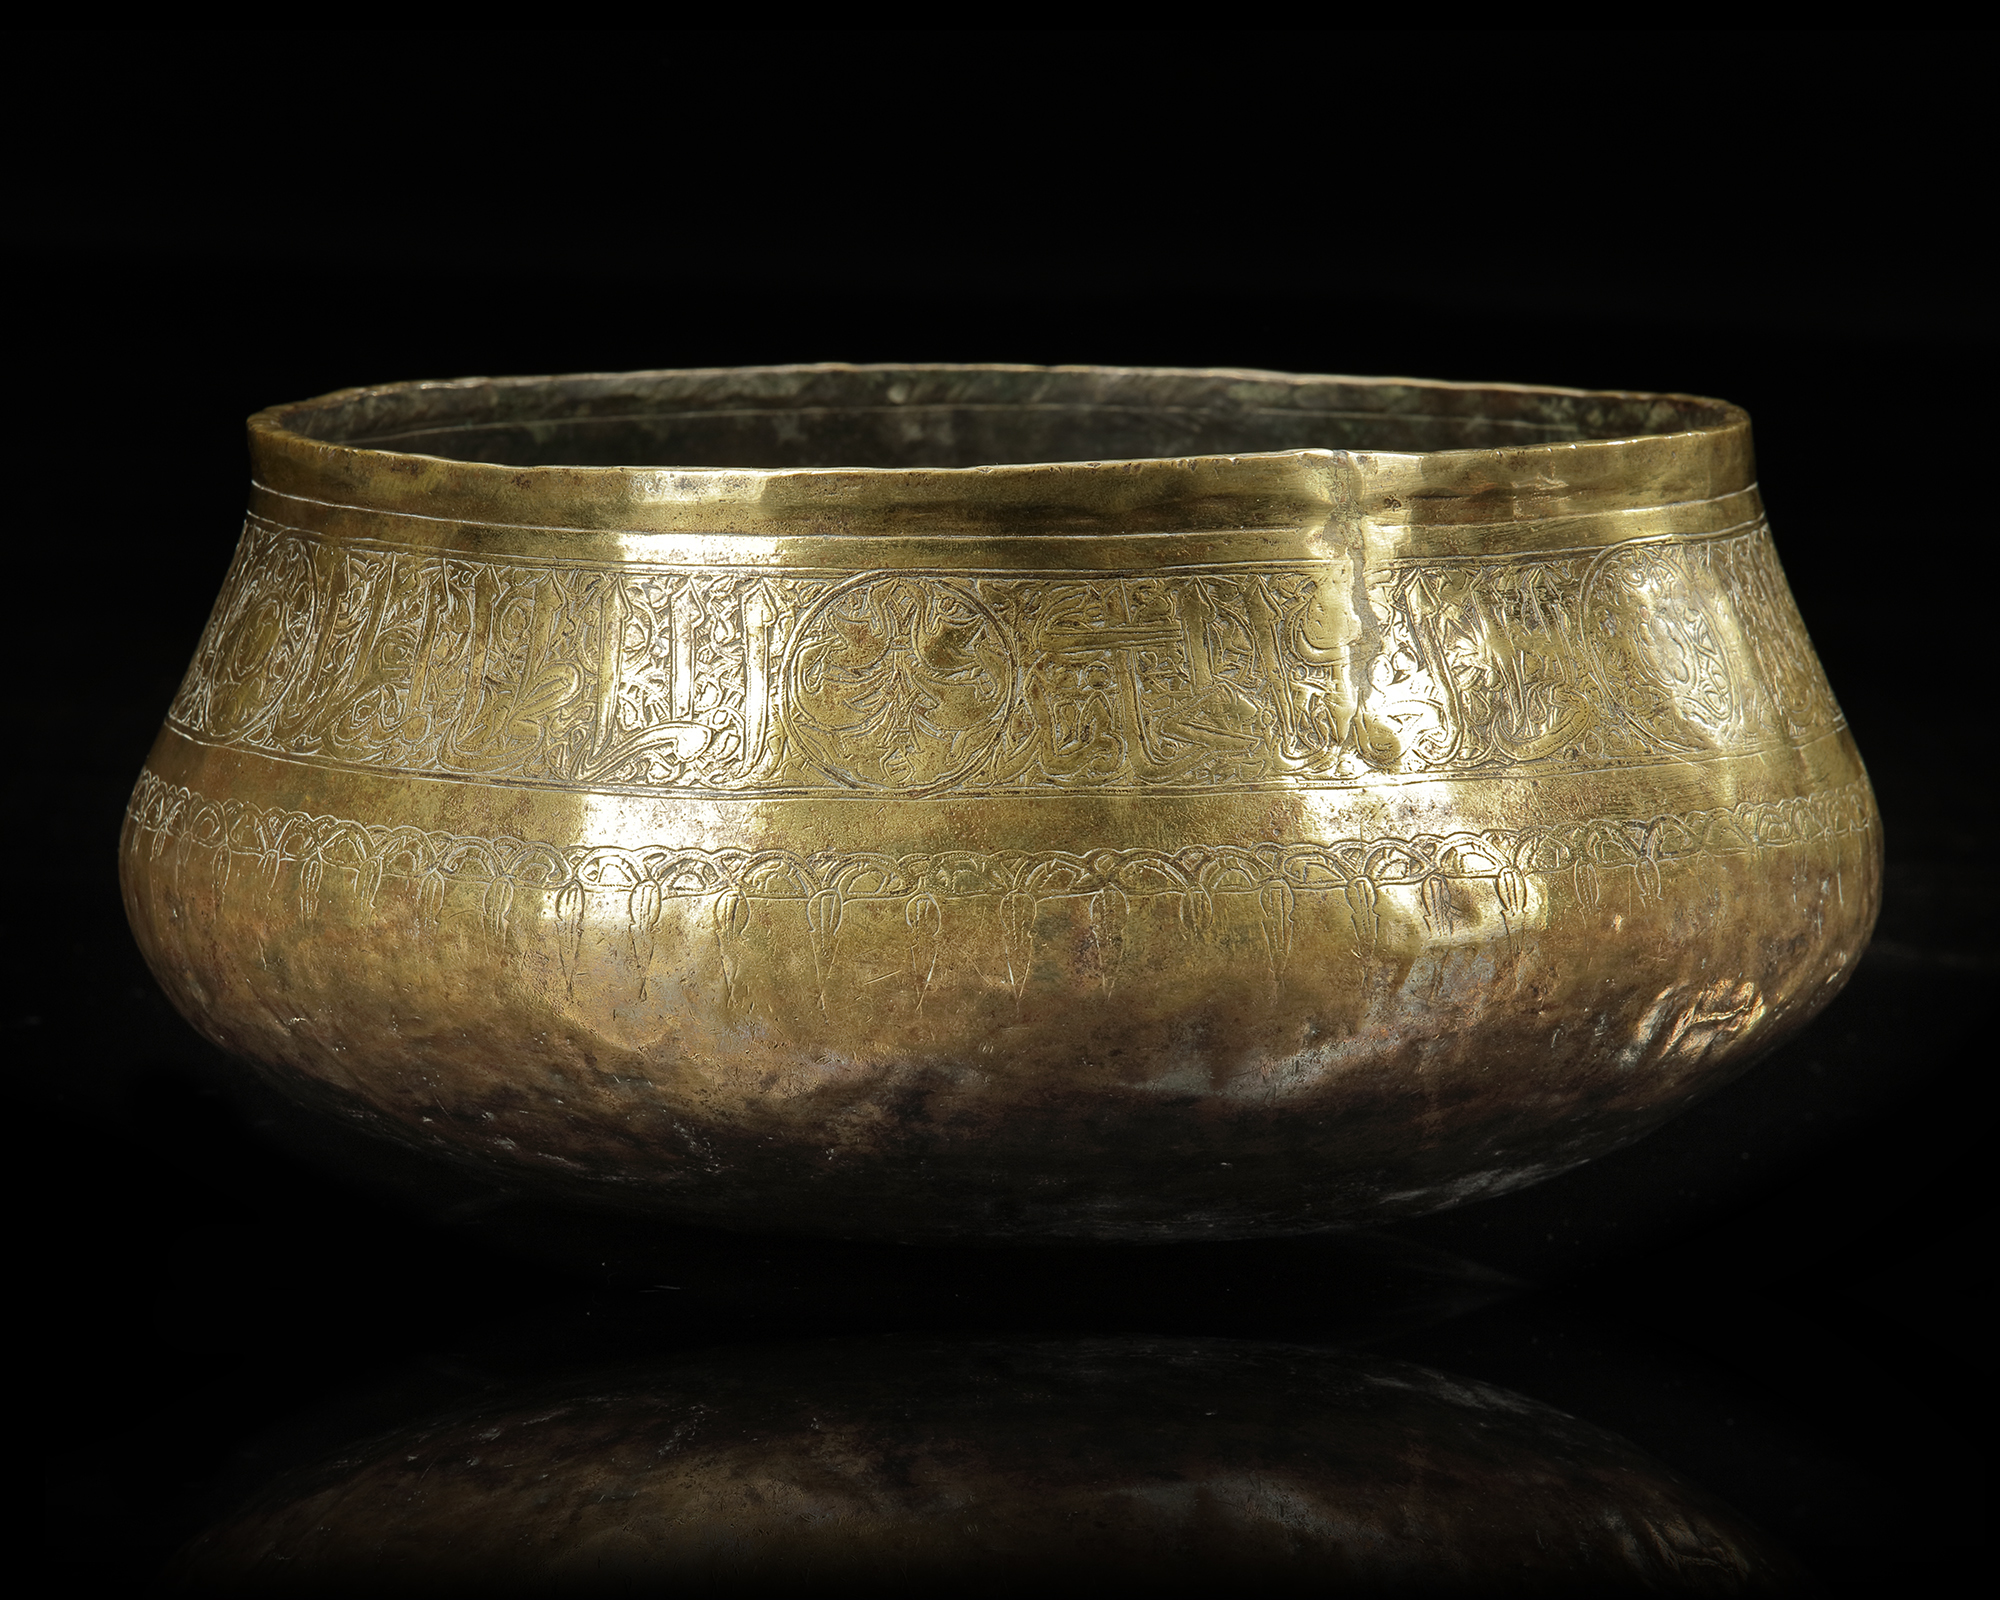 A MAMLUK BRASS BOWL WITH INSCRIPTIONS, EGYPT OR SYRIA, 14TH CENTURY - Image 2 of 4